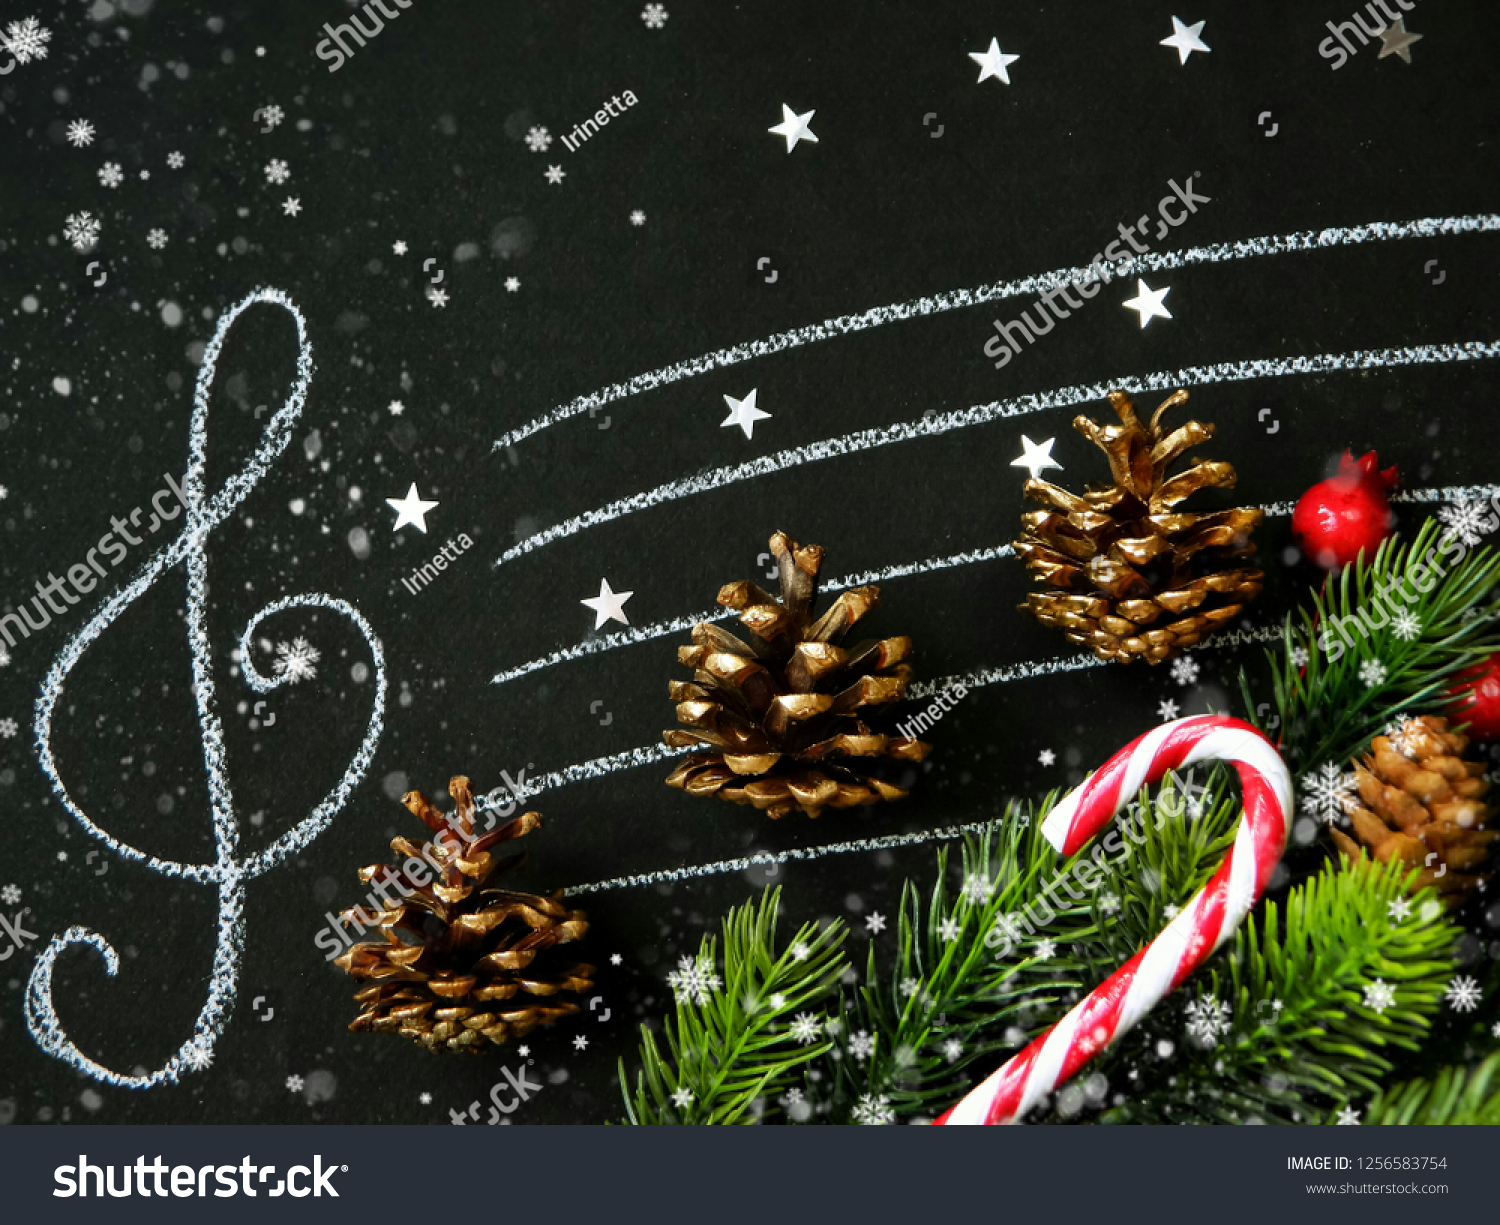 Golden fir cones, fir branches, Christmas decor on the stave with treble clef. Holiday background. #1256583754